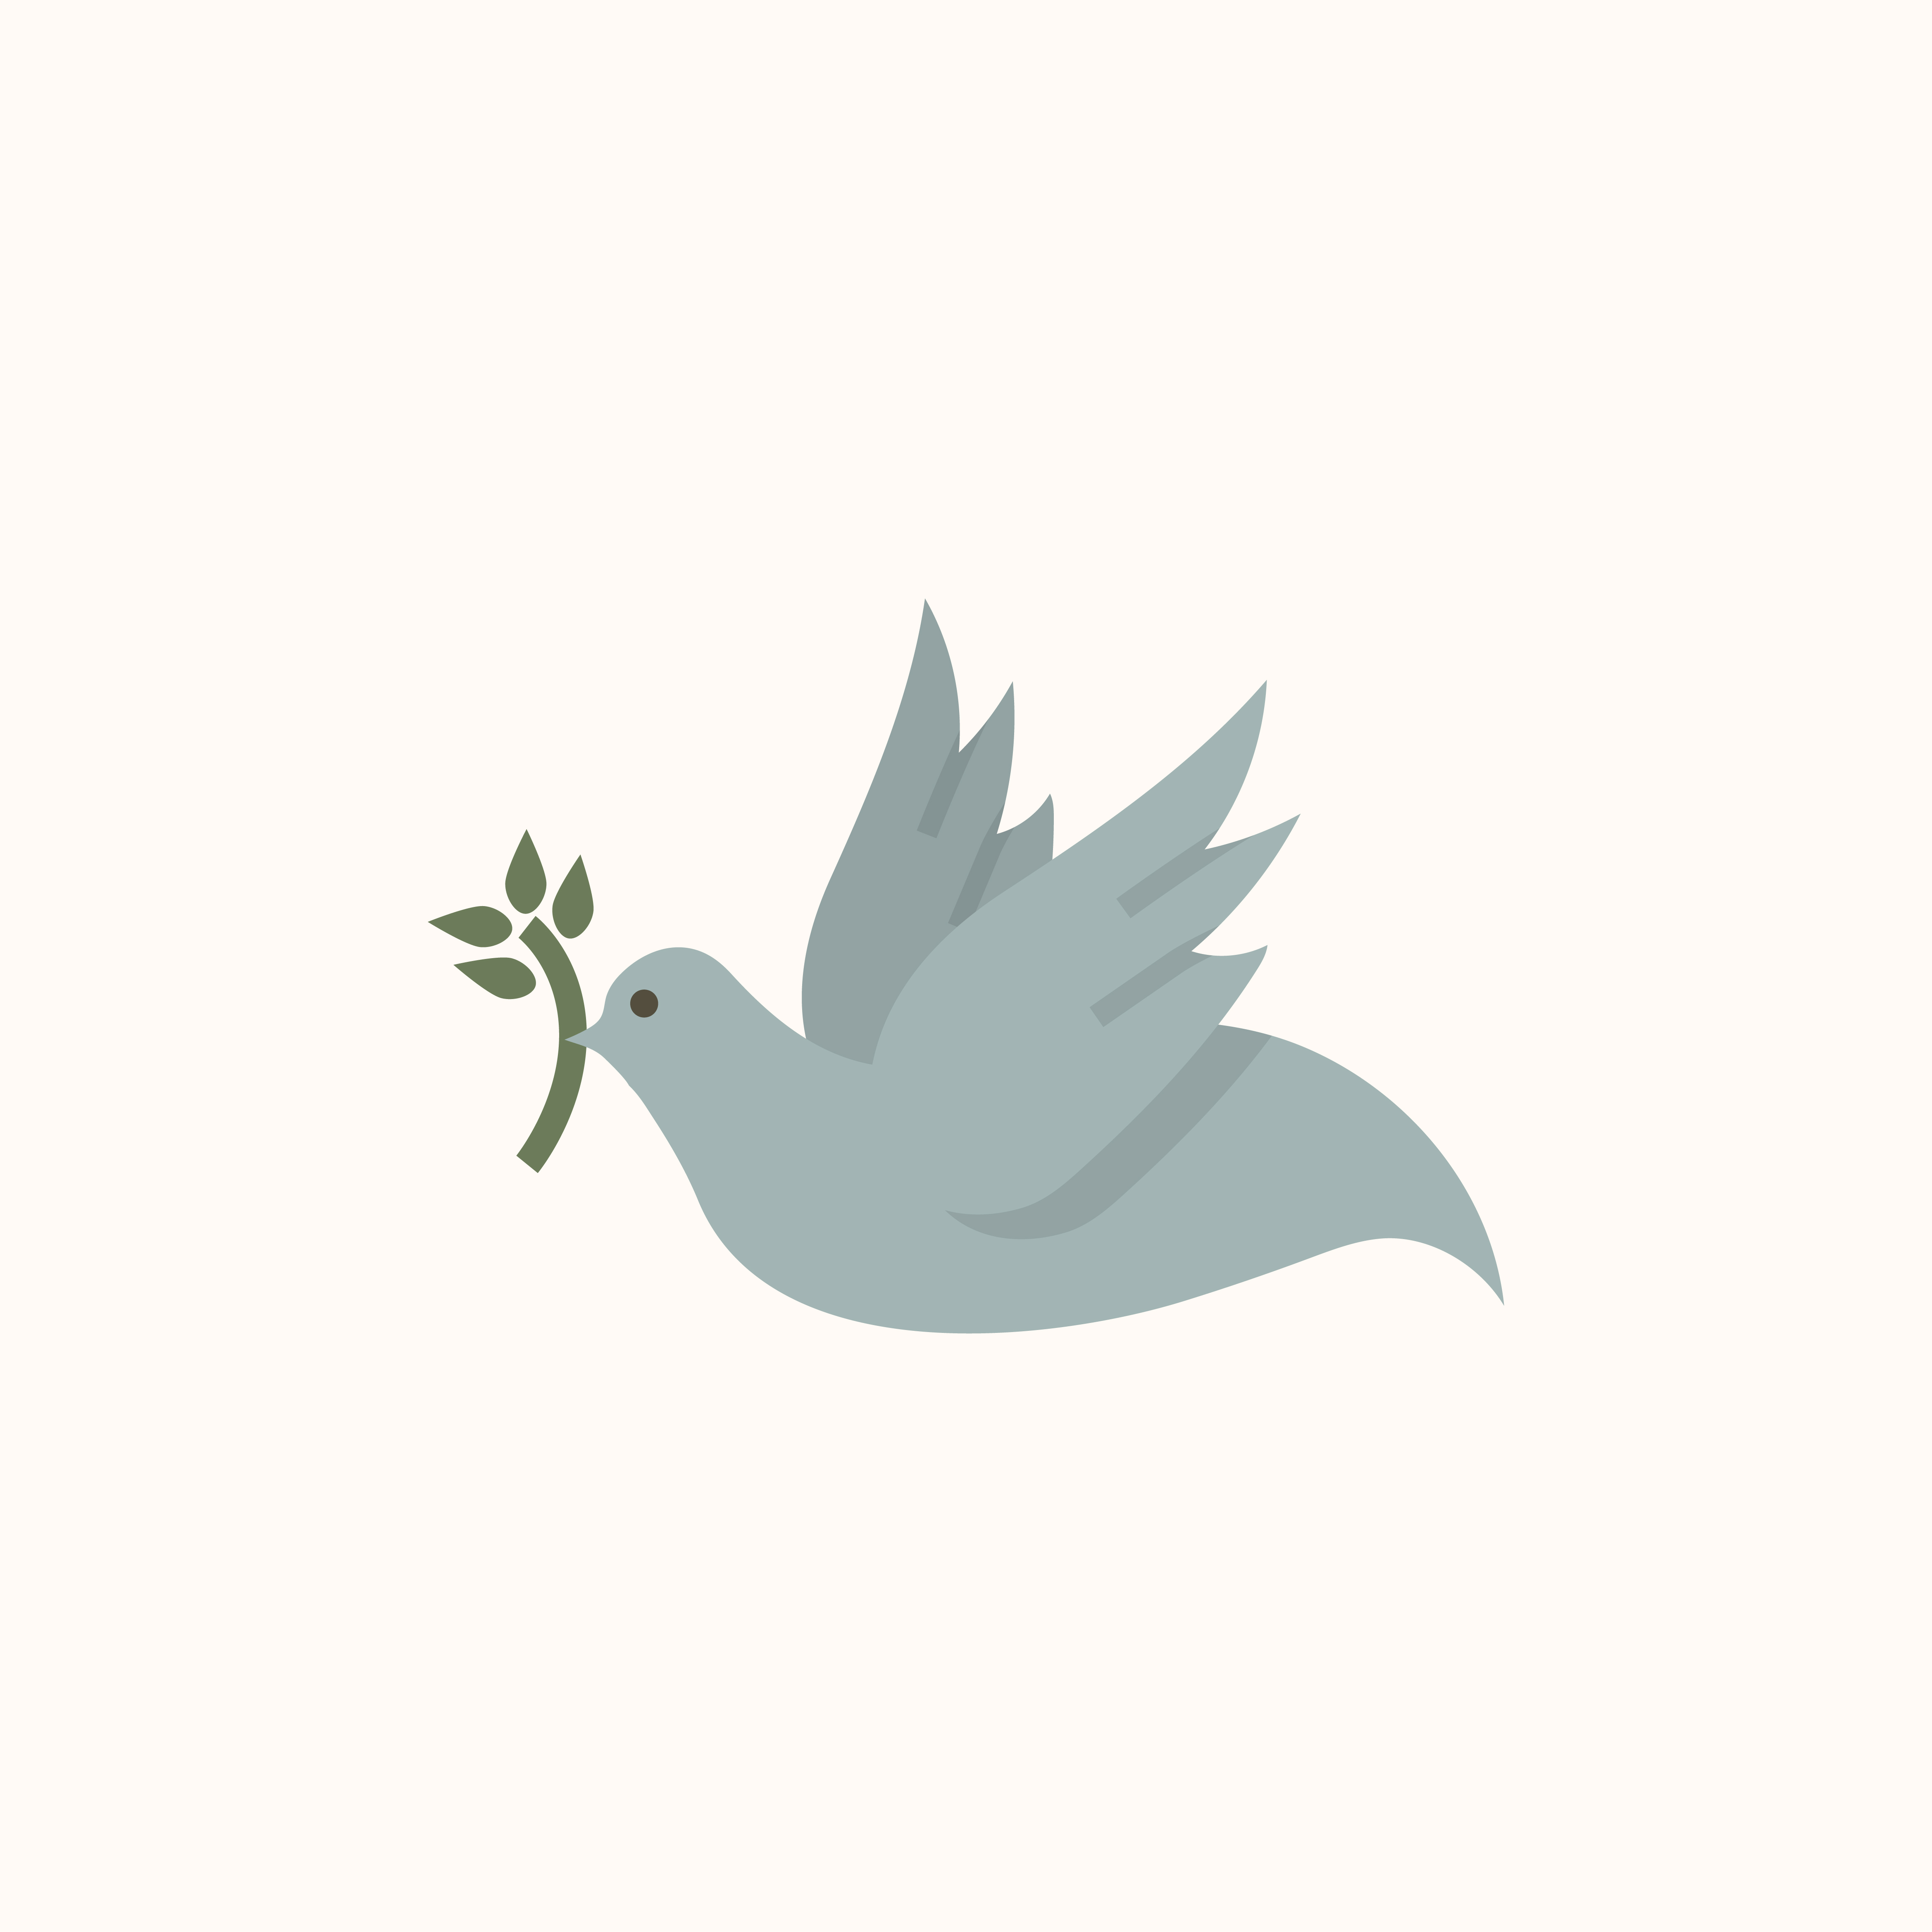 Illustration of a dove of peace Download Free Vectors